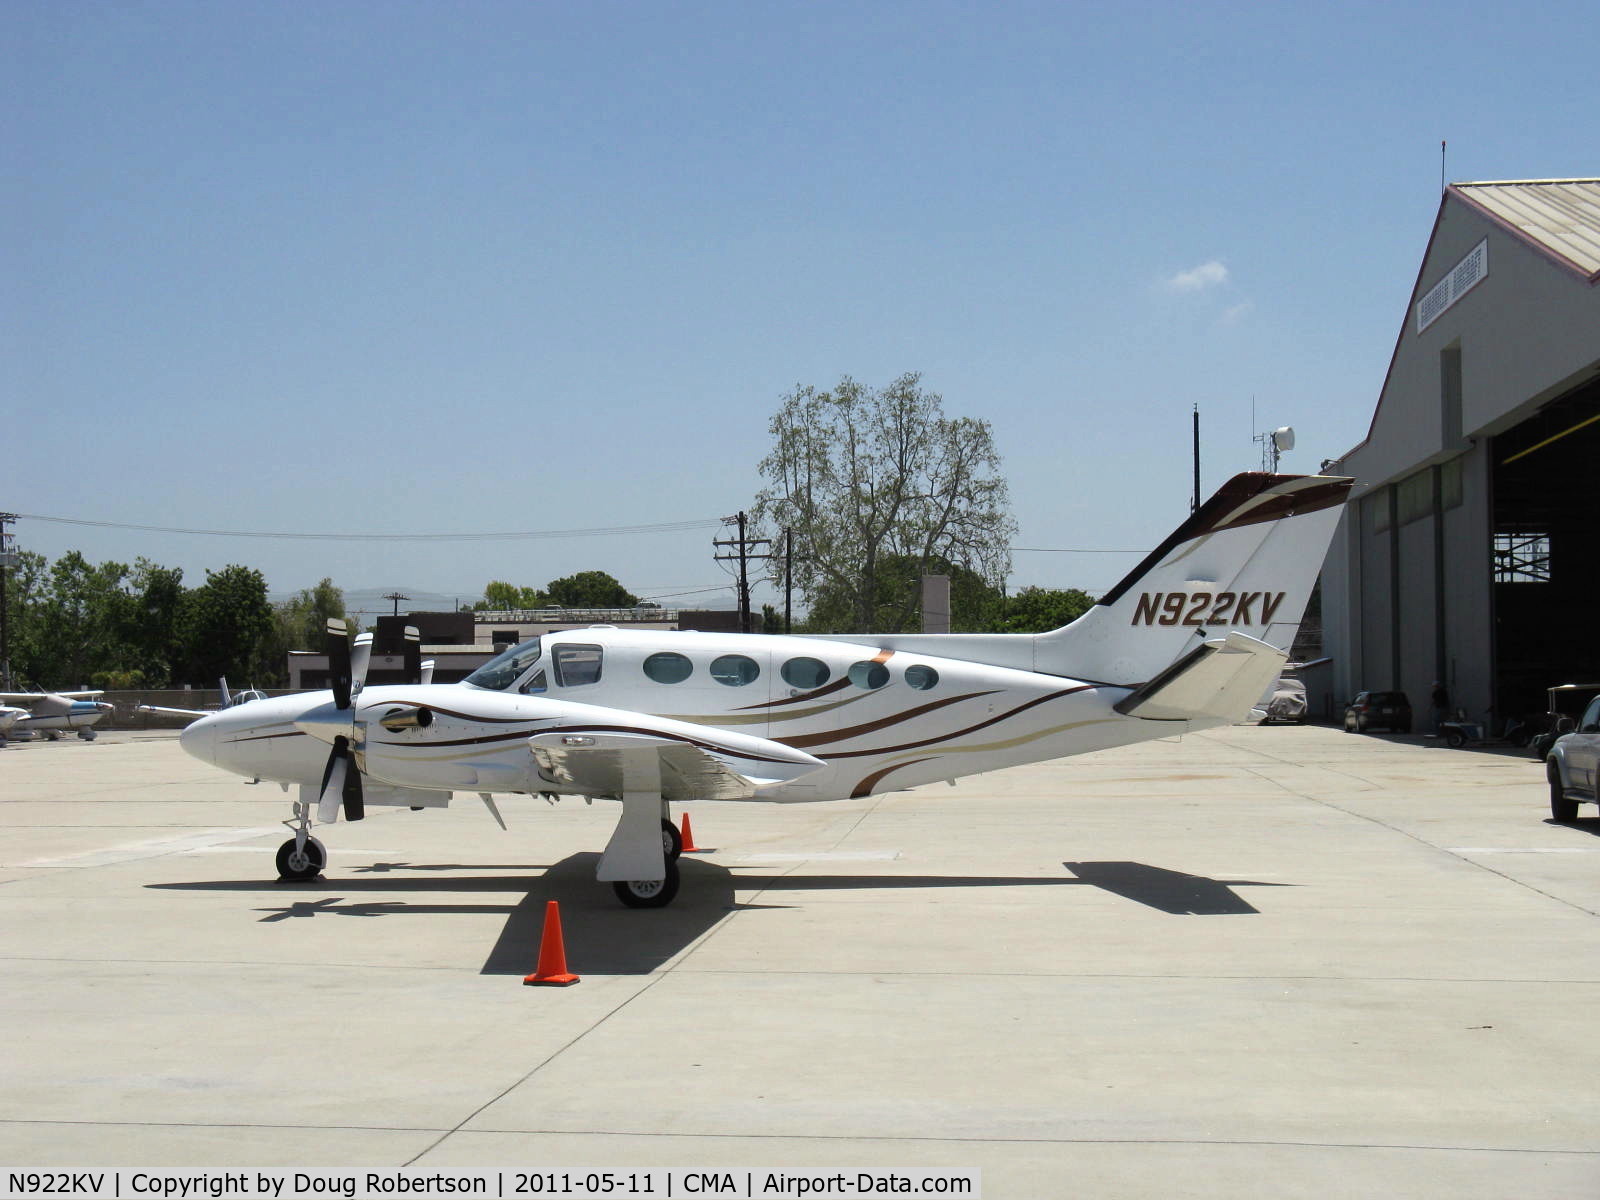 N922KV, 1981 Cessna 425 C/N 425-0052, 1981 Cessna 425 CORSAIR, two P&W(C)PT6A-60A Turboprops flat rated to 450 shp each, Pressurized cabin.